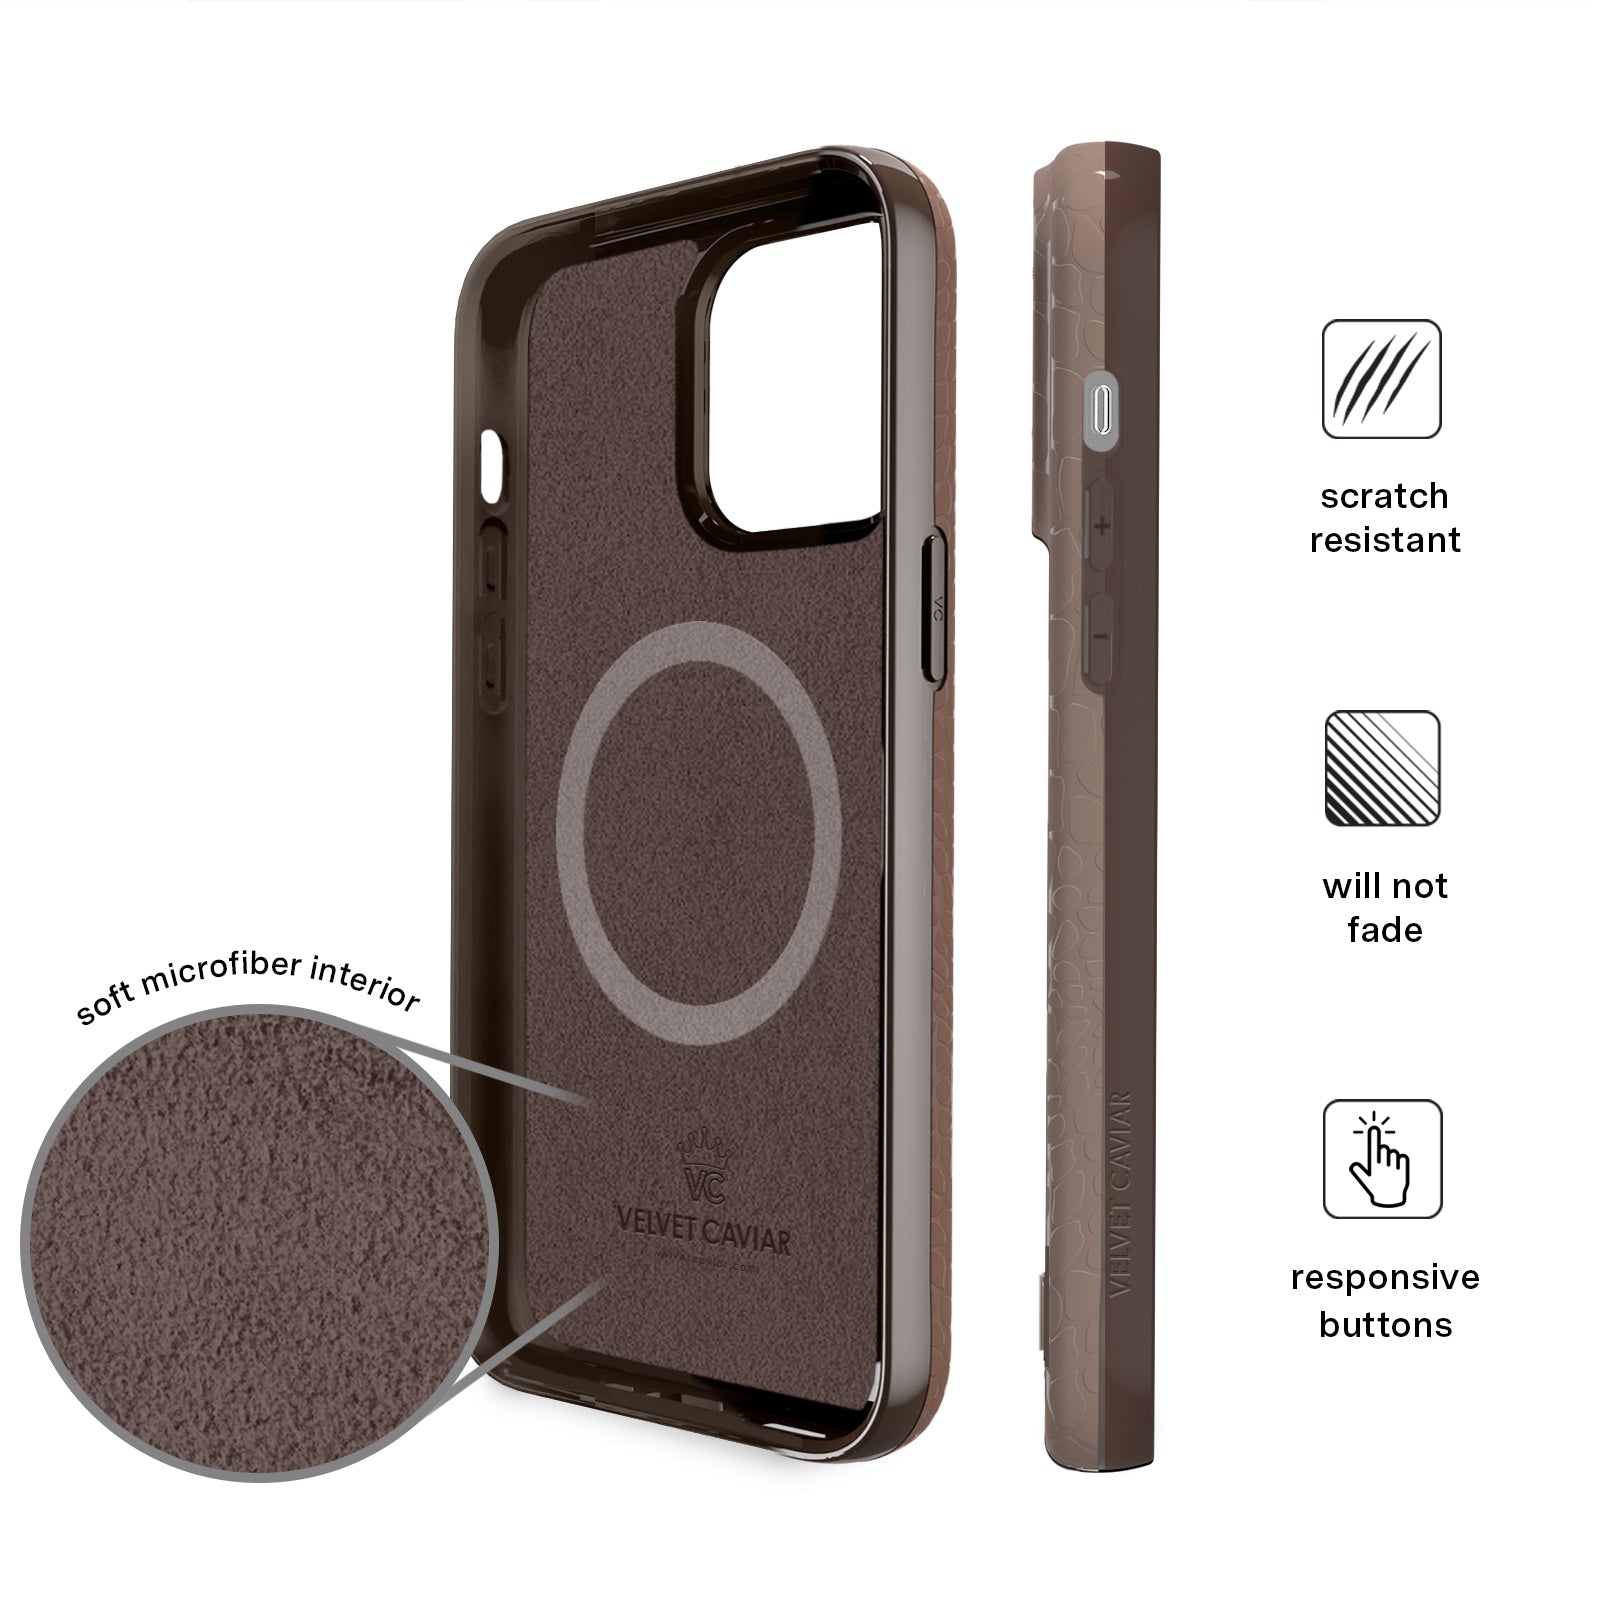 Designer Phone Cases Fashion Cell Cover Pu Leather High Quality Full Body  Protective For Iphone15 14 13 Iphone 12 Pro MINI 11 XR XS Max 7/8 Plus  Samsung S20 S10 NOTE 8 9 10 From Majatic, $9.92